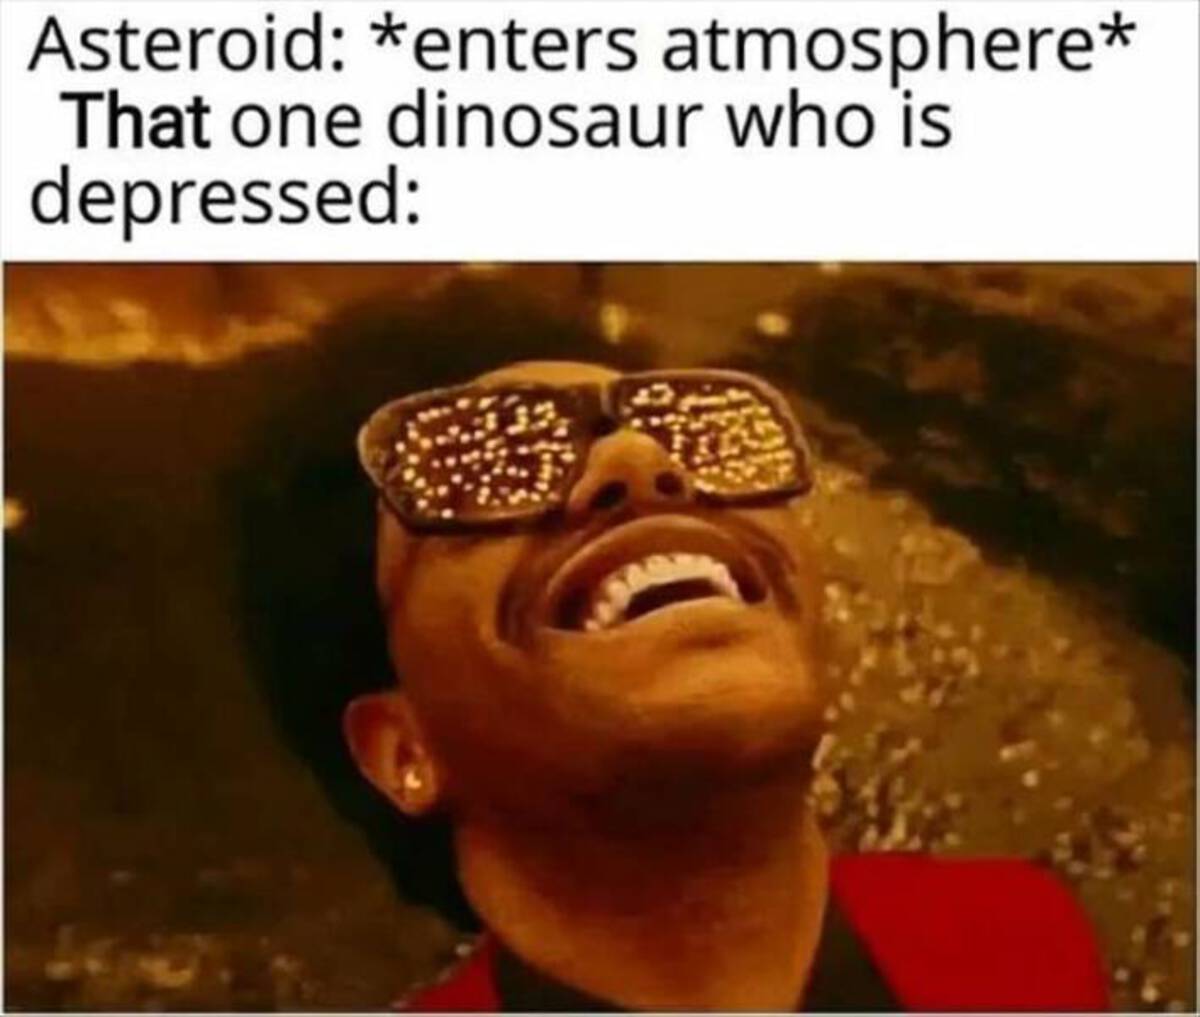 asteroid memes - Asteroid enters atmosphere That one dinosaur who is depressed